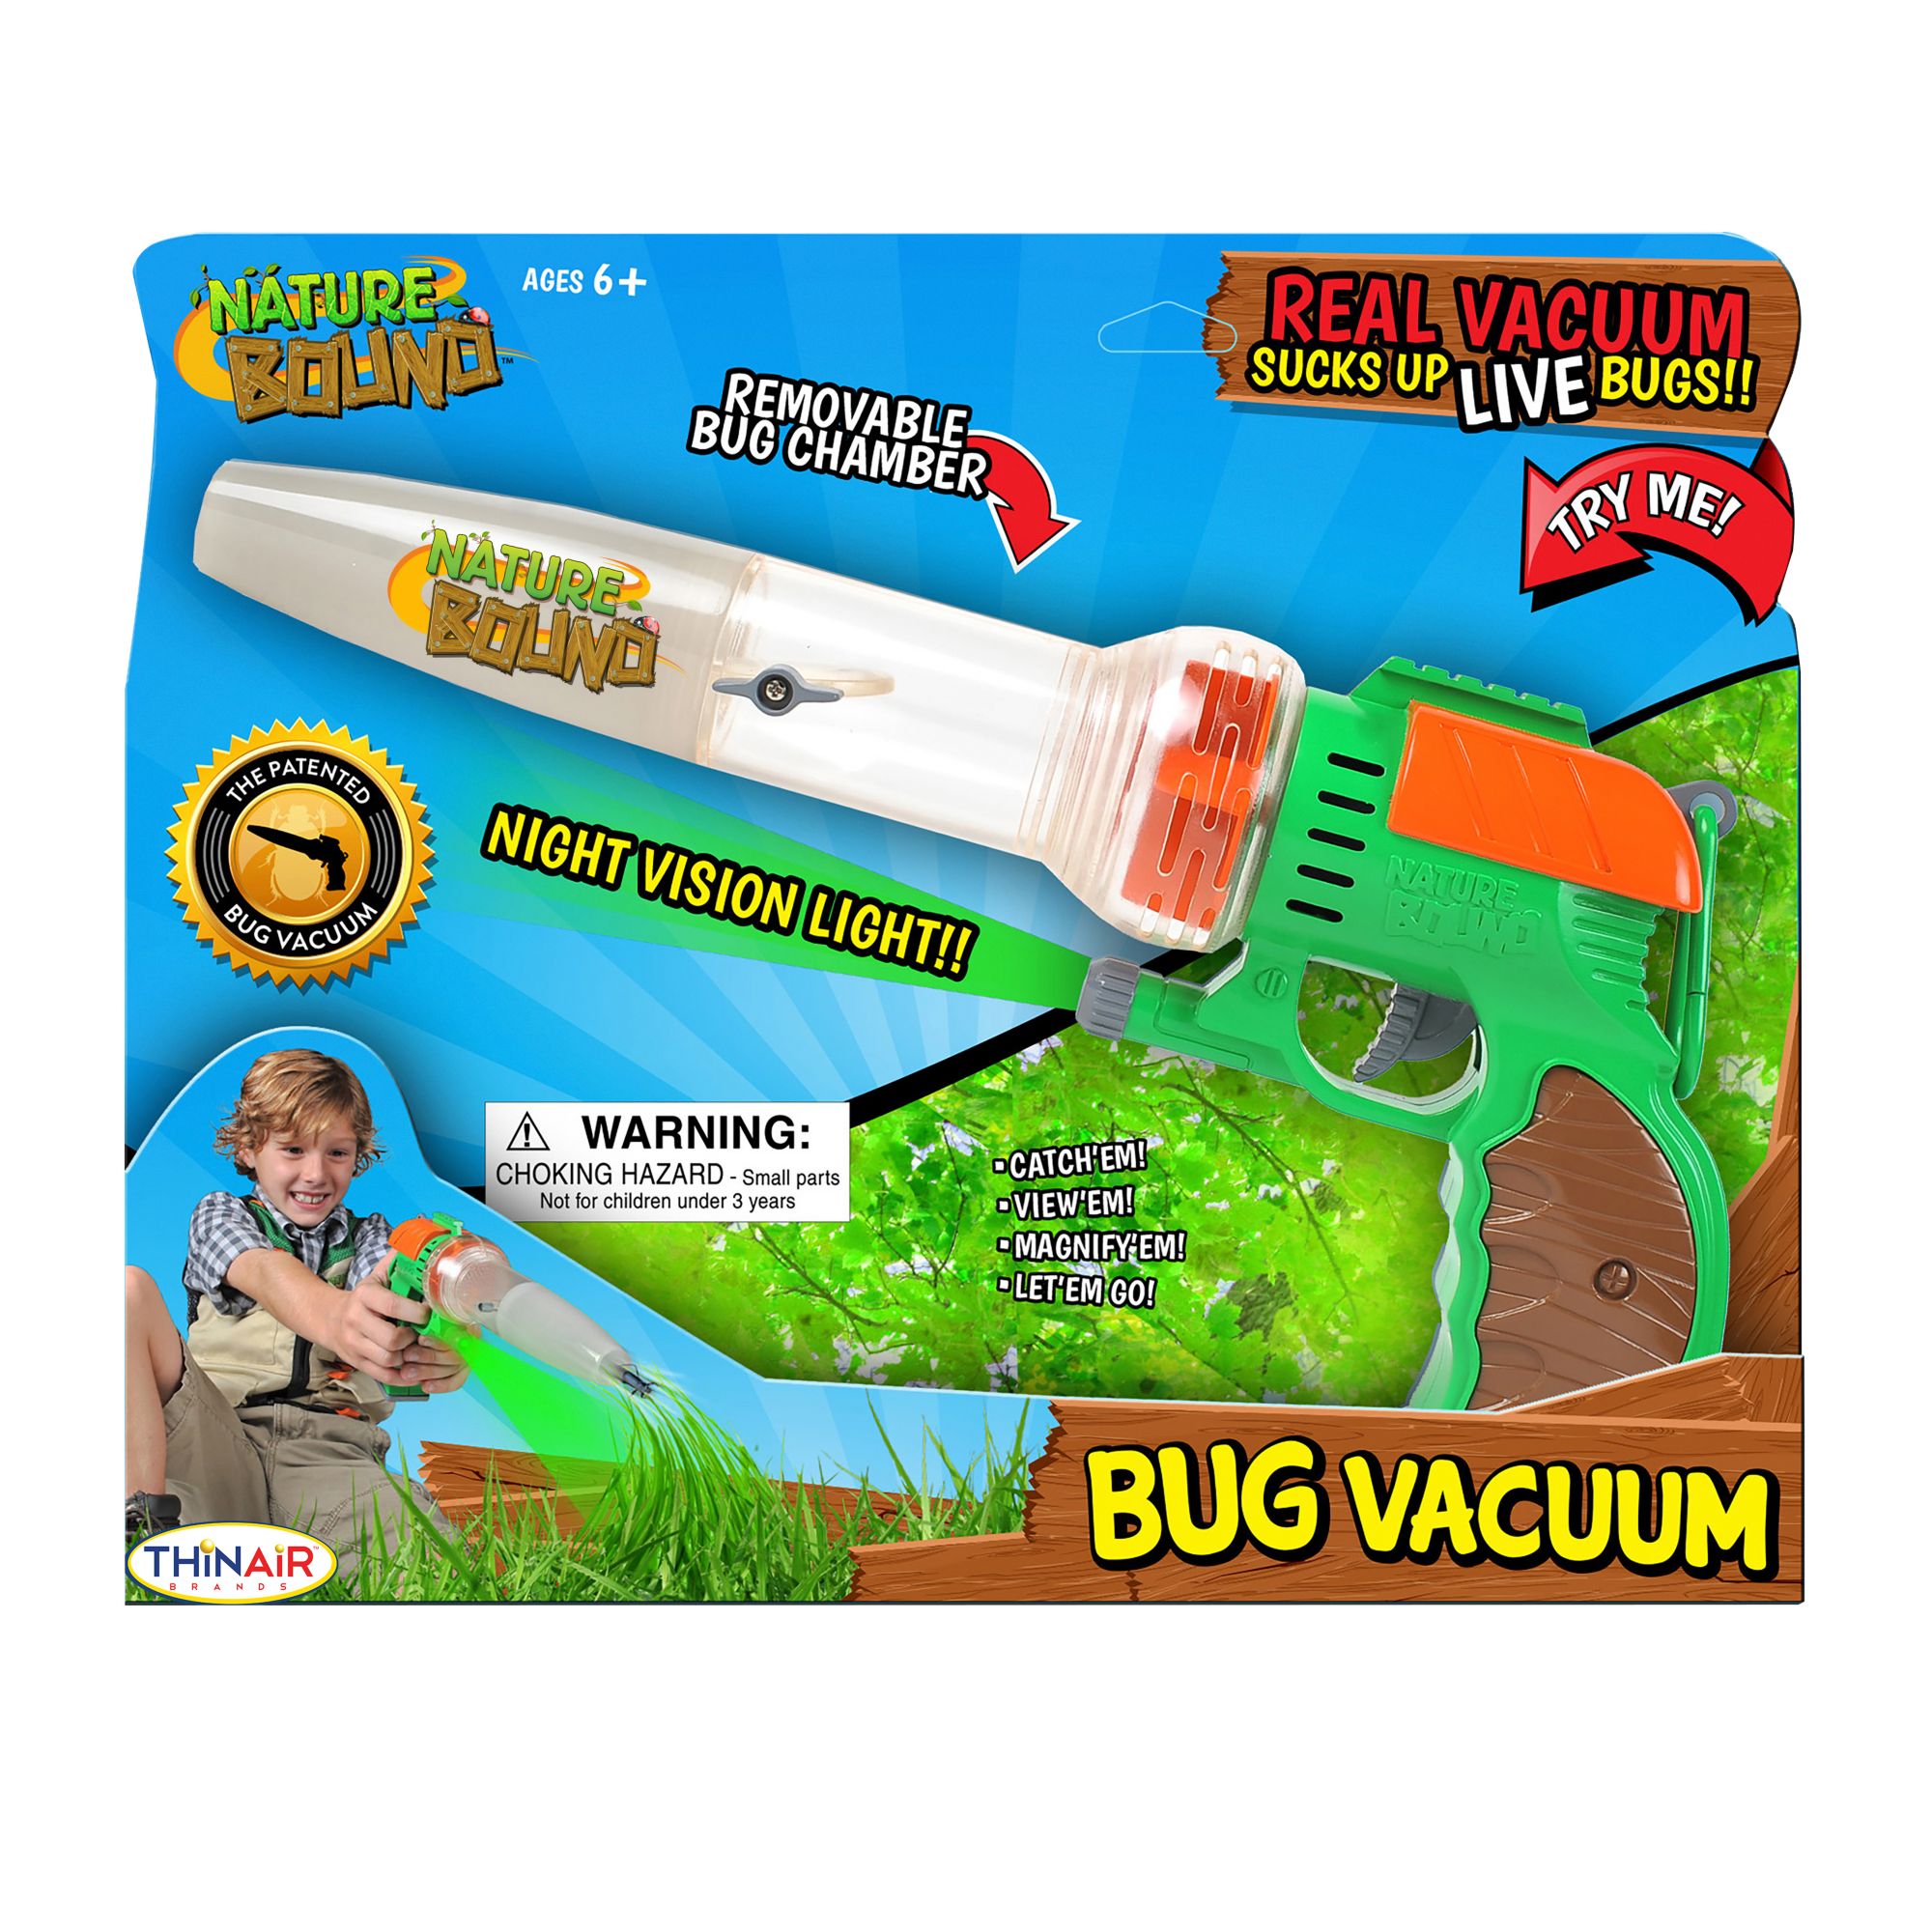 Order Nature Bound Bug Catcher Complete Kit now